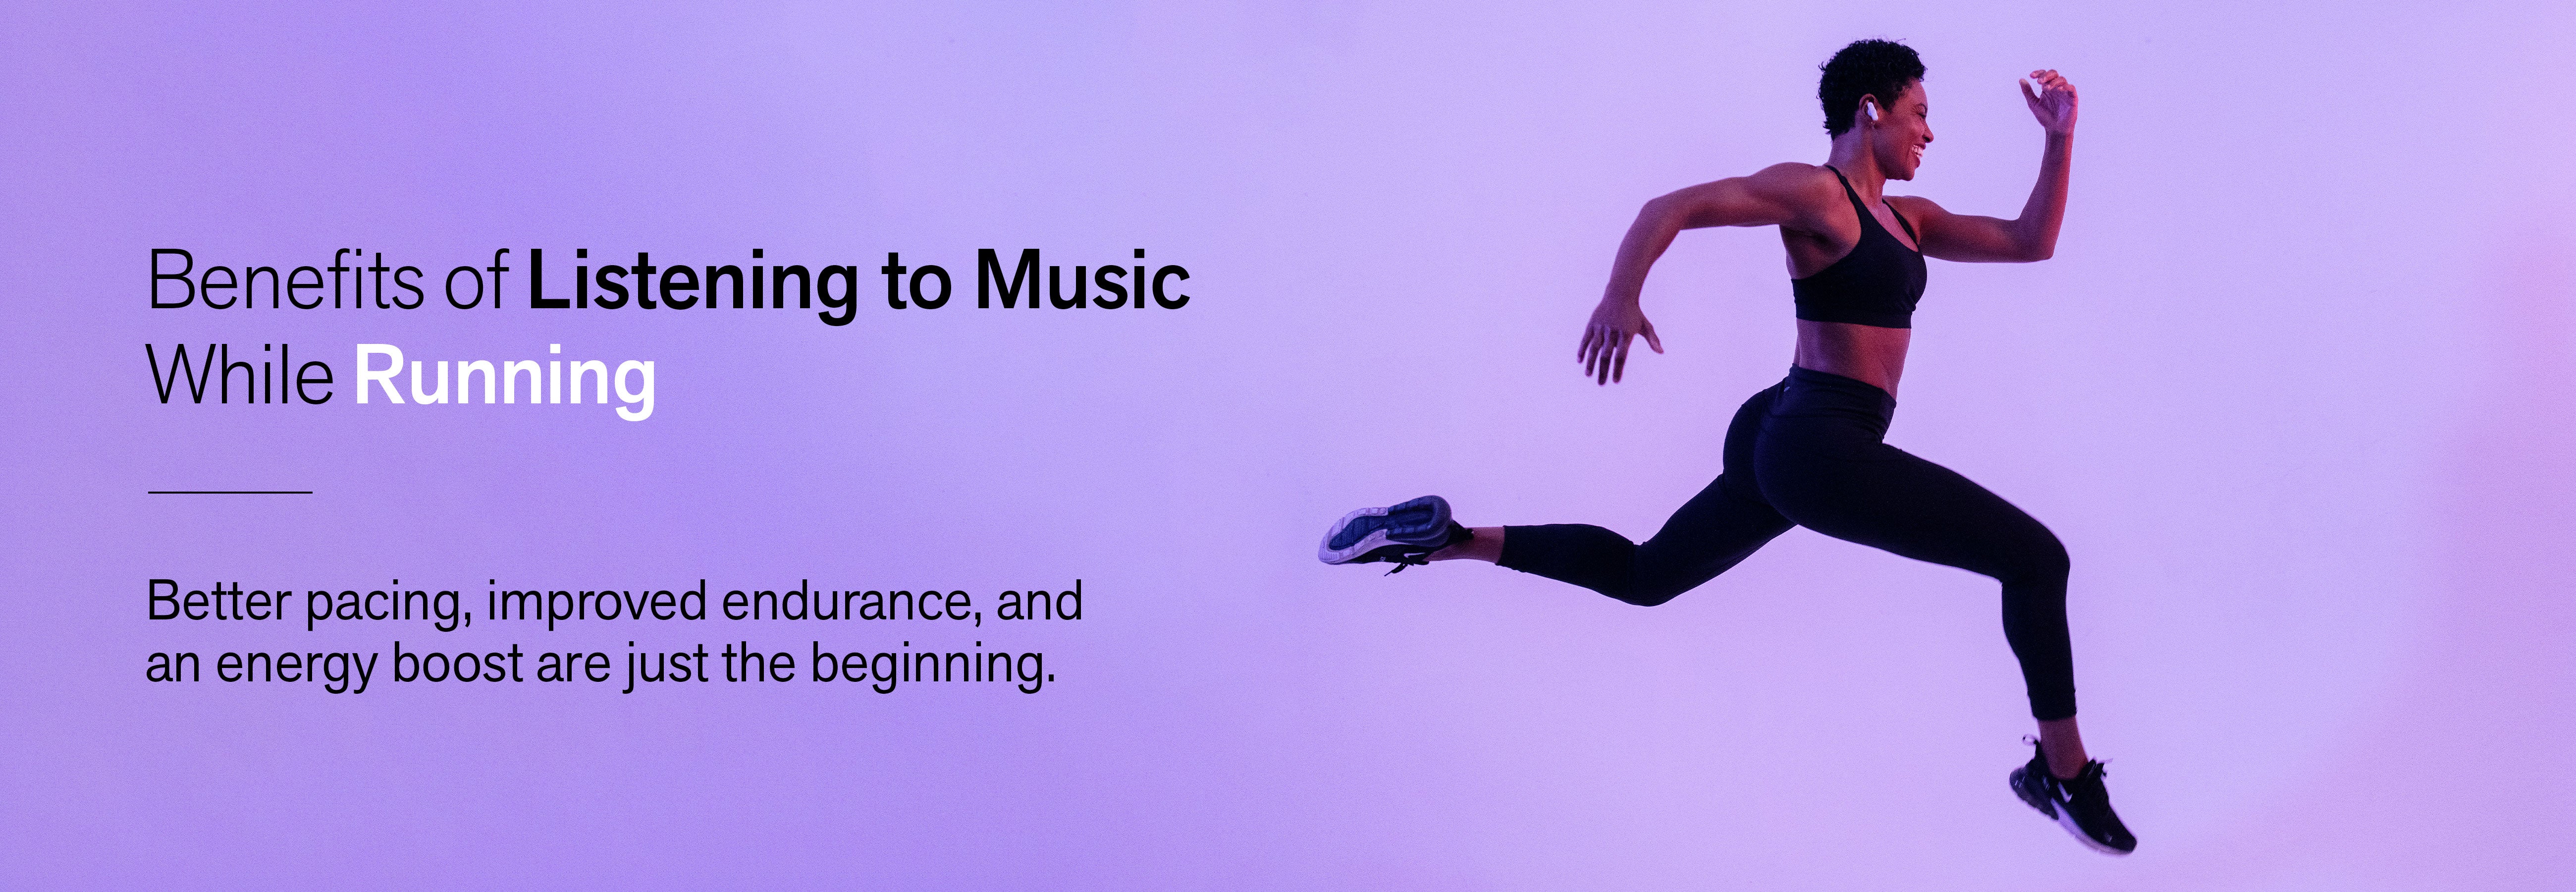 Benefits of Listening to Music While Running